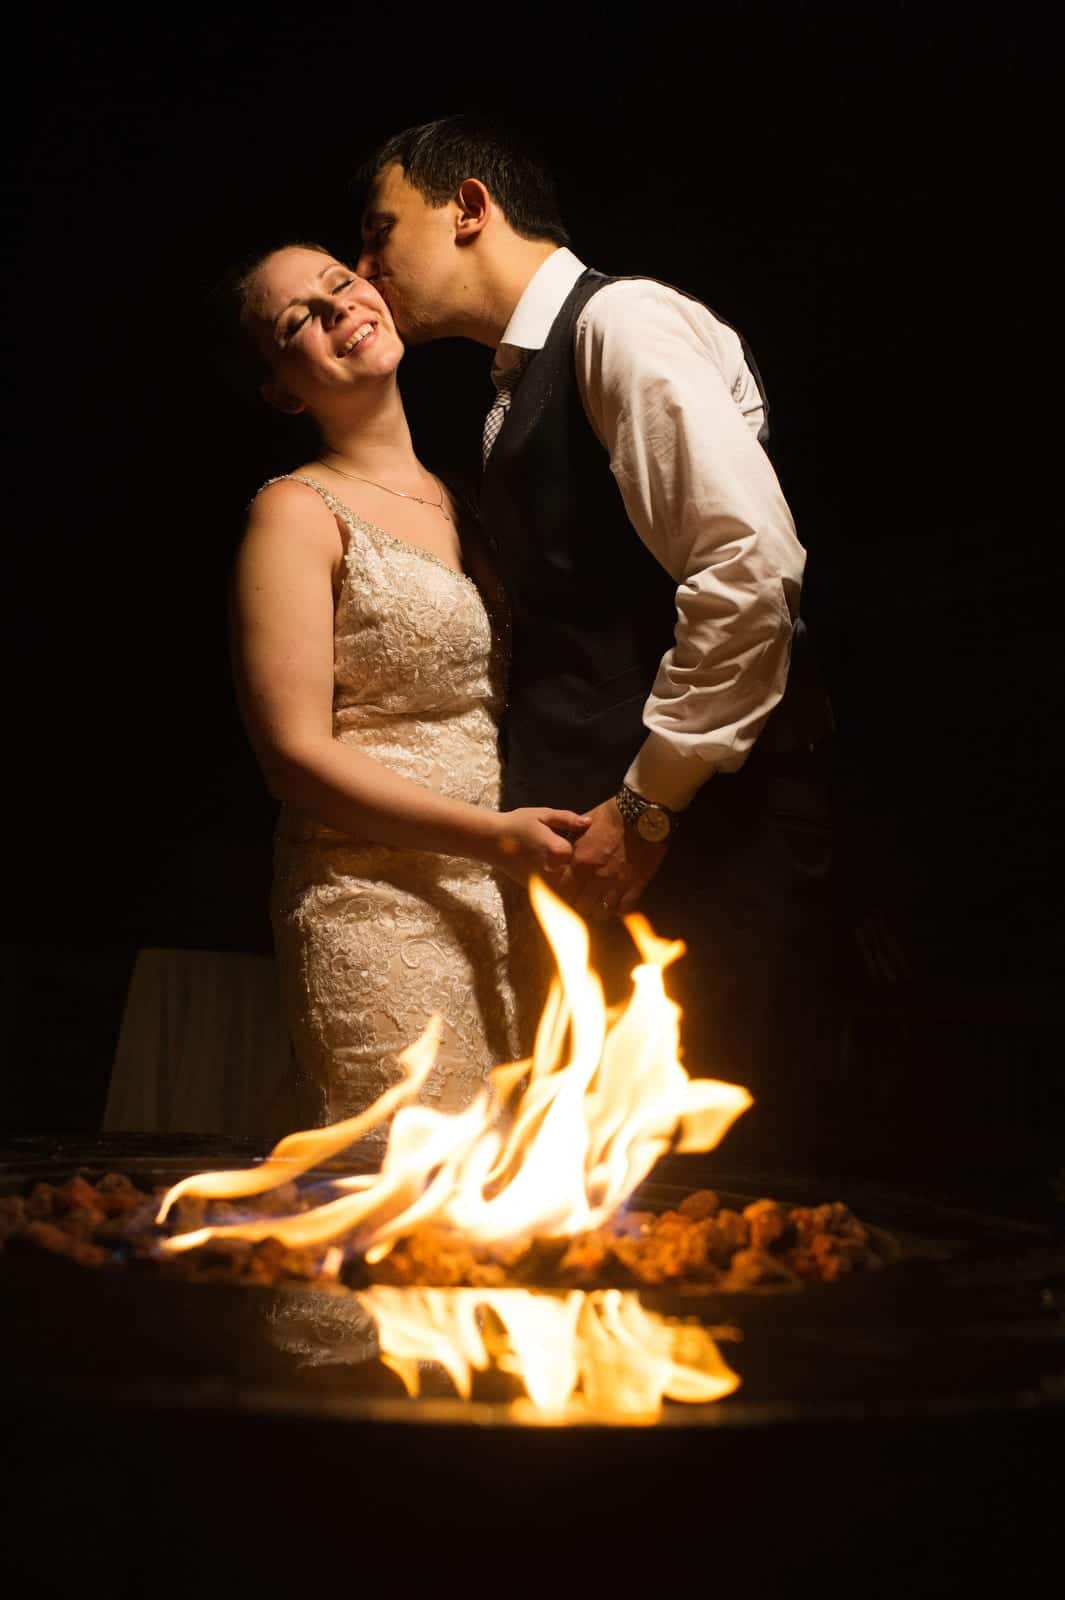 A bride smiles as she stands by a fire pit and her groom kisses her on the cheek after their Seven Springs Wedding.